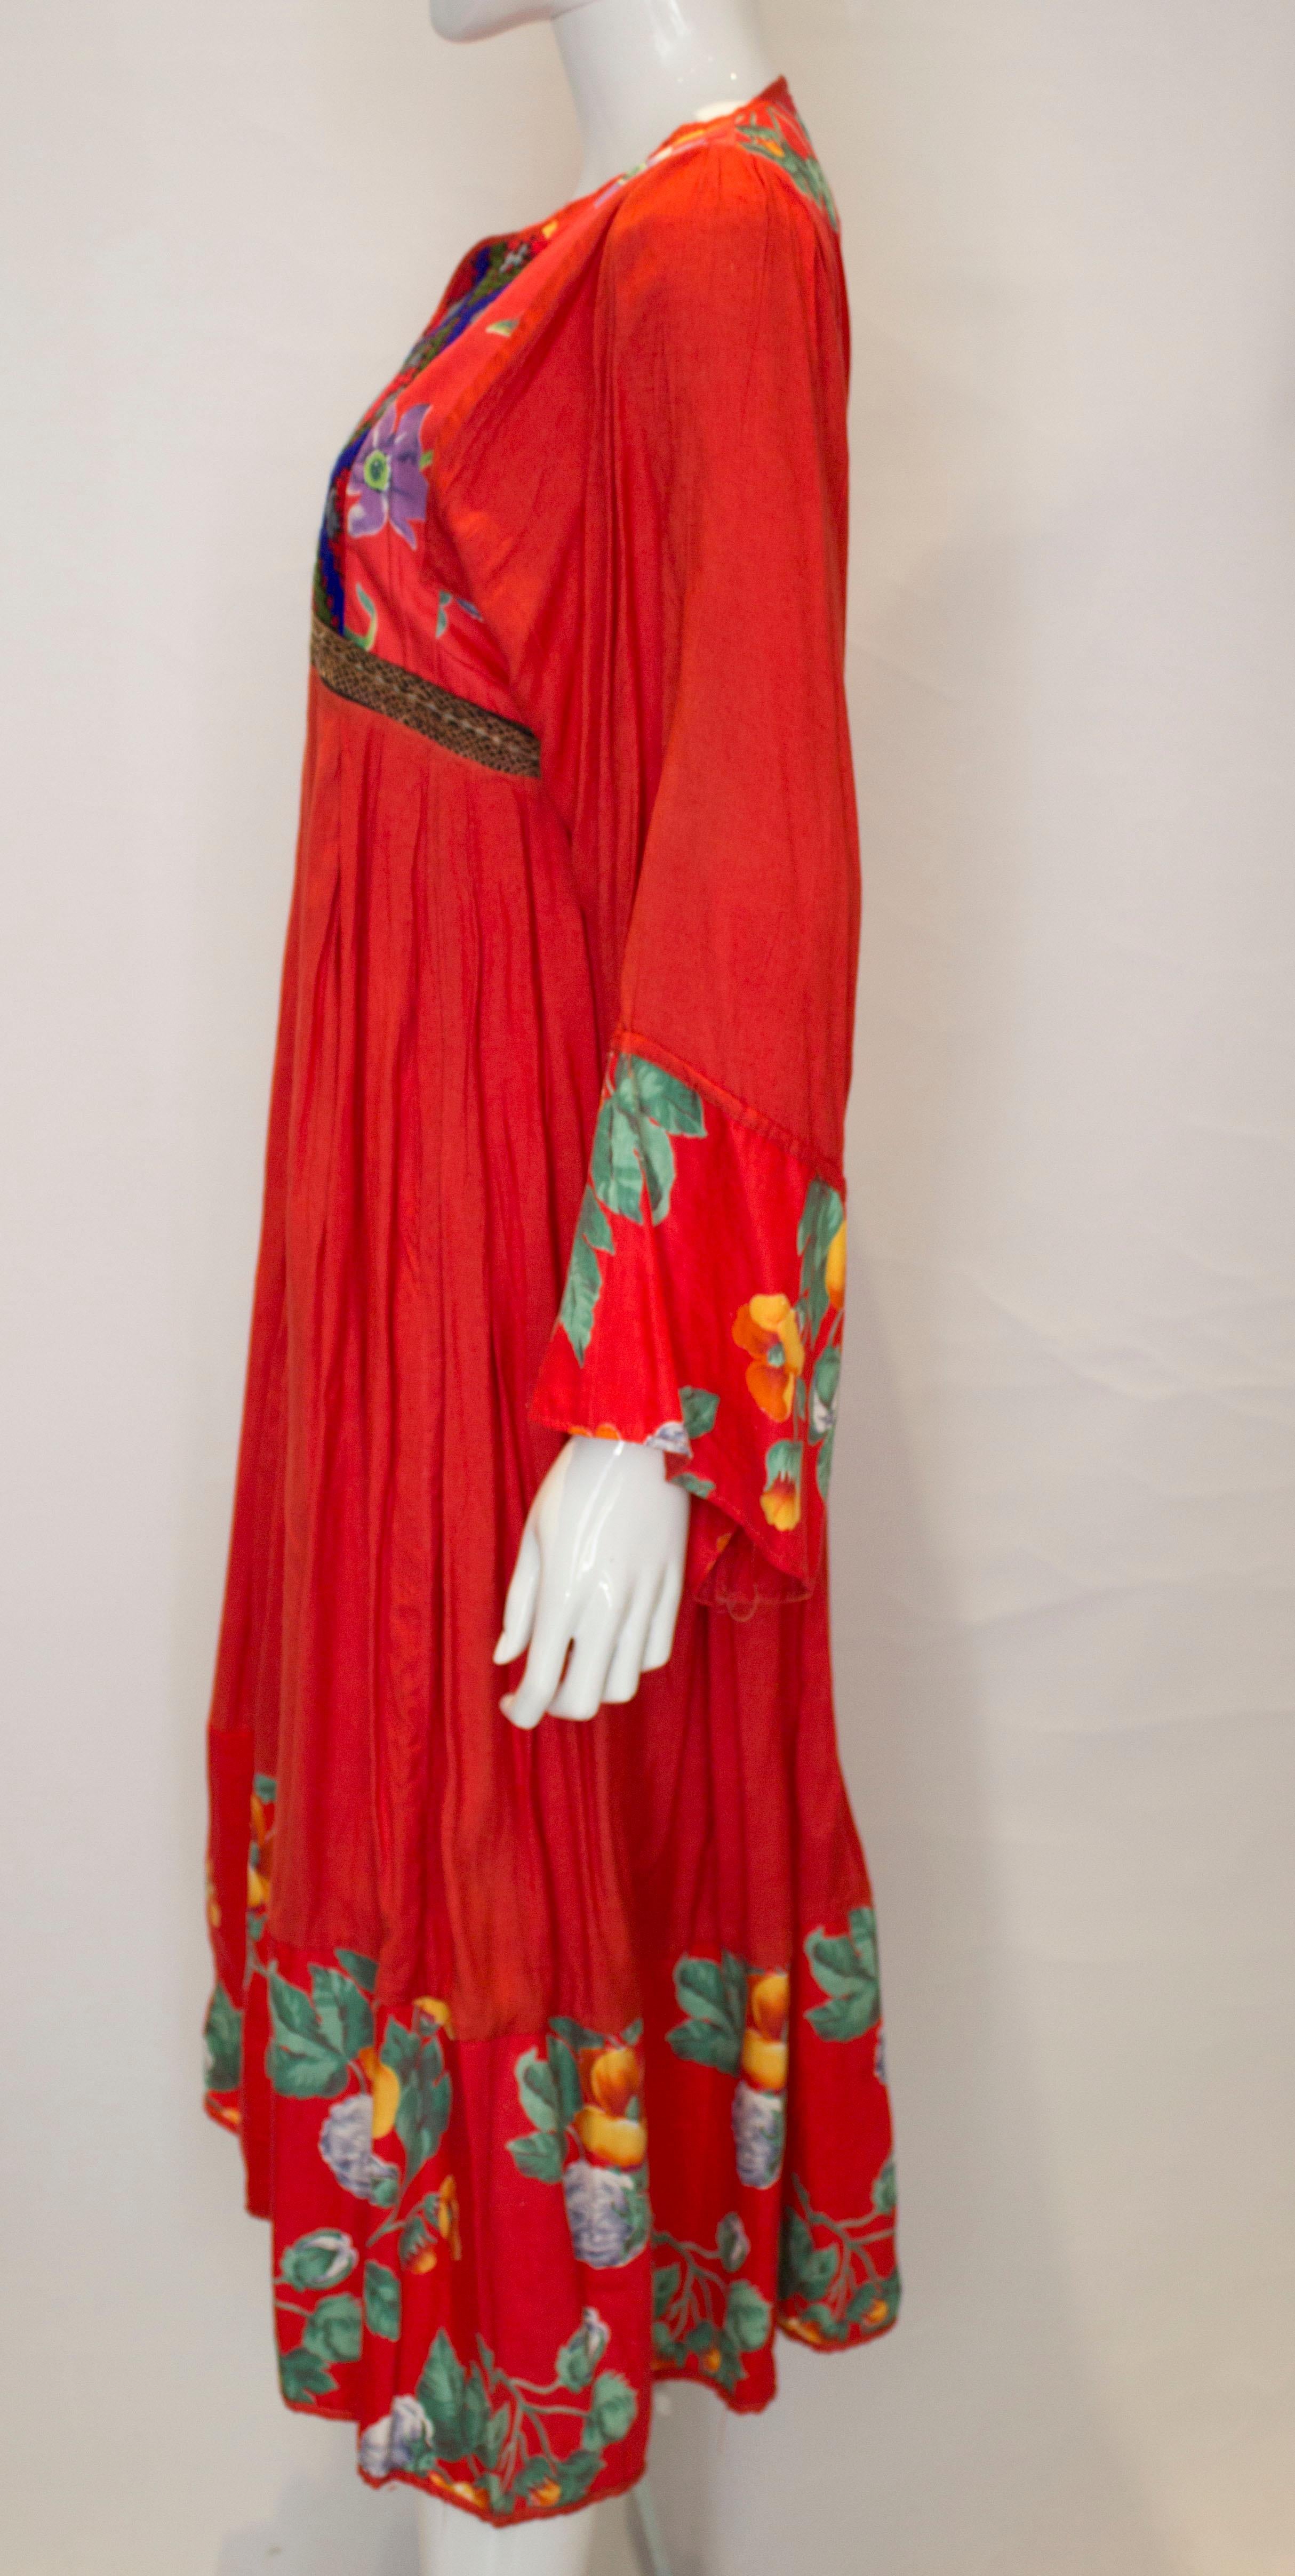 Vintage Red Cotton Boho Dress In Good Condition For Sale In London, GB